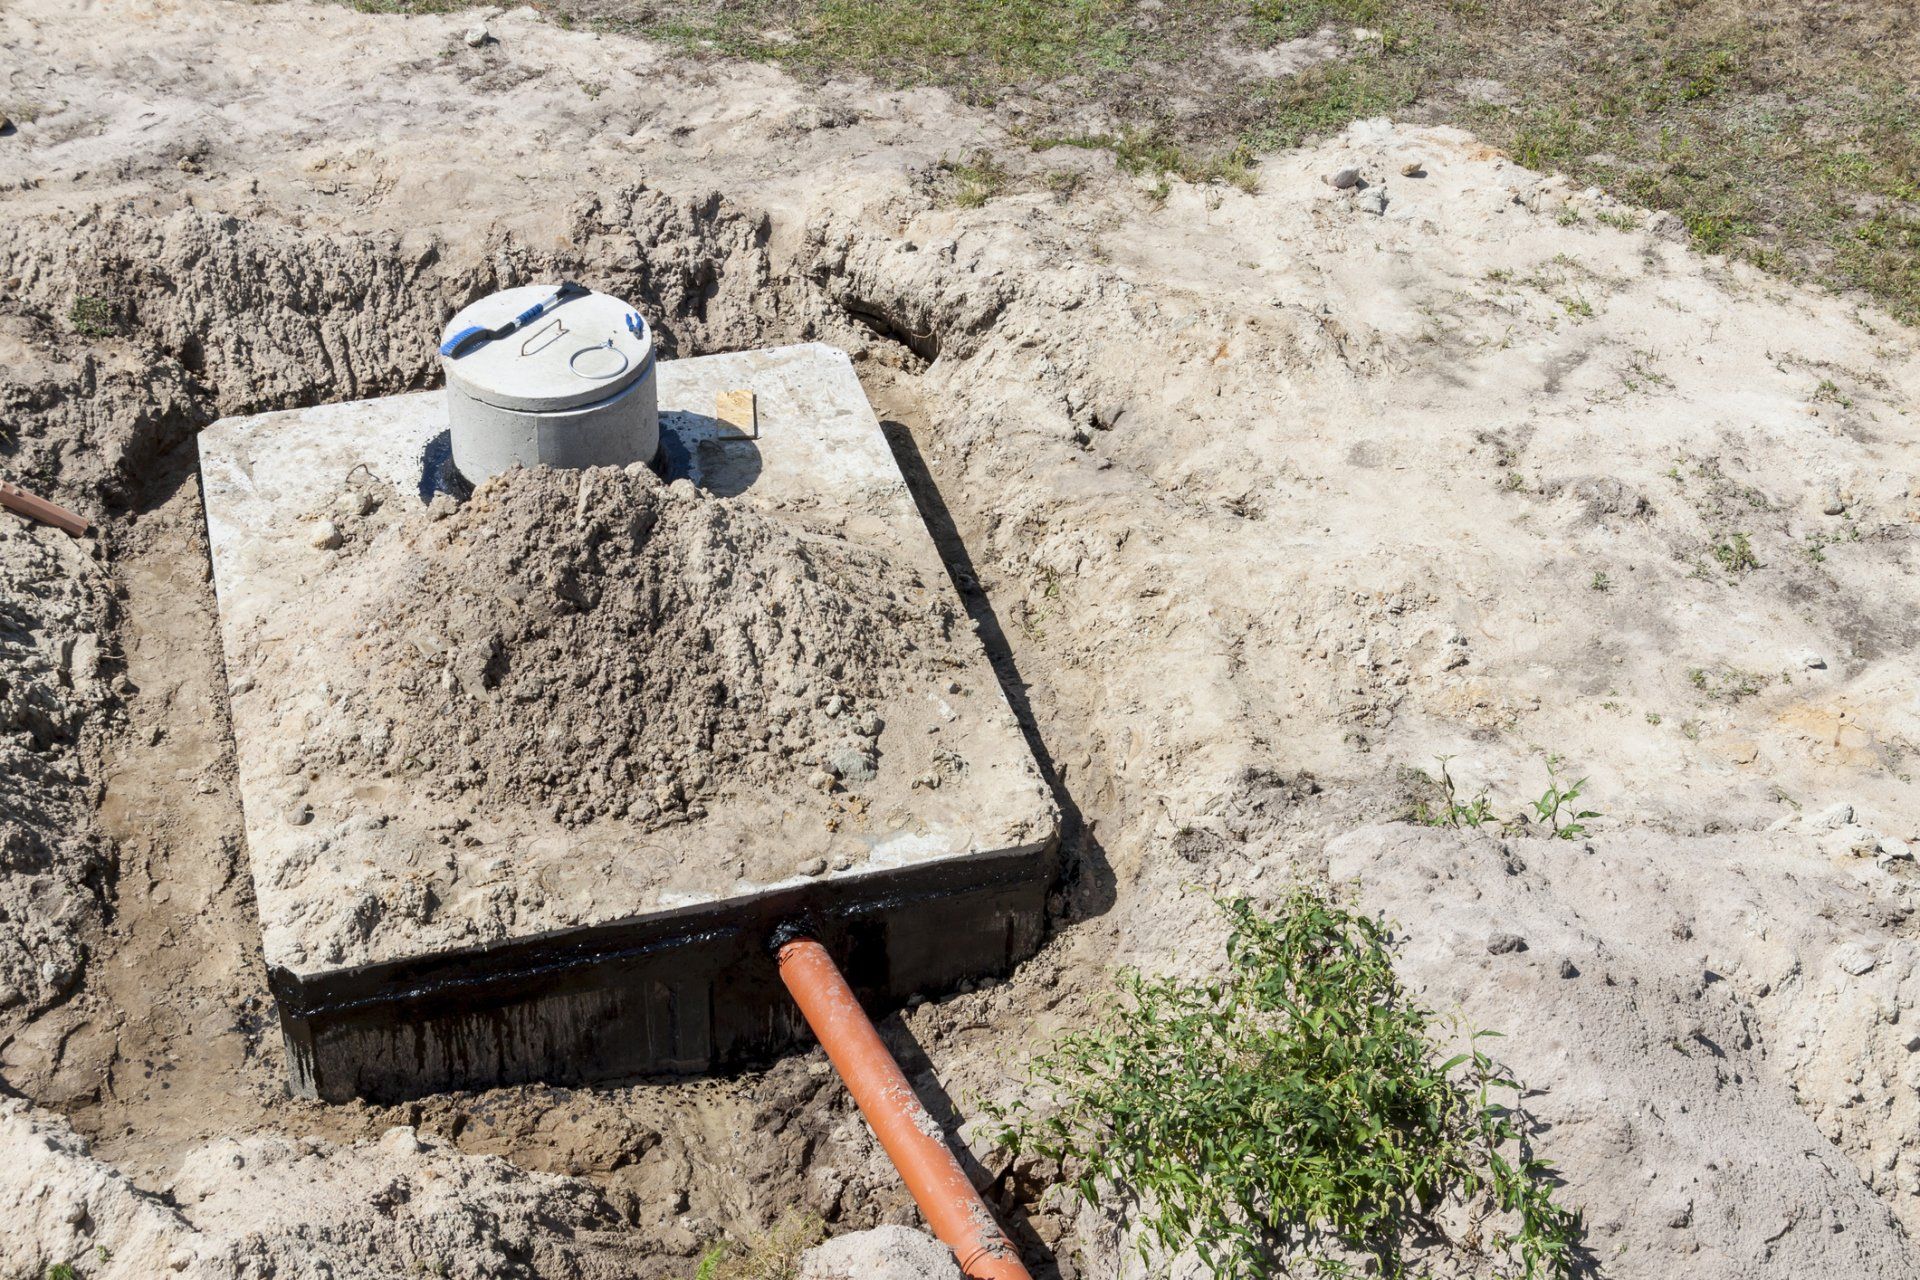 I Bought A House With An Abandoned Septic Tank; Should I Have It